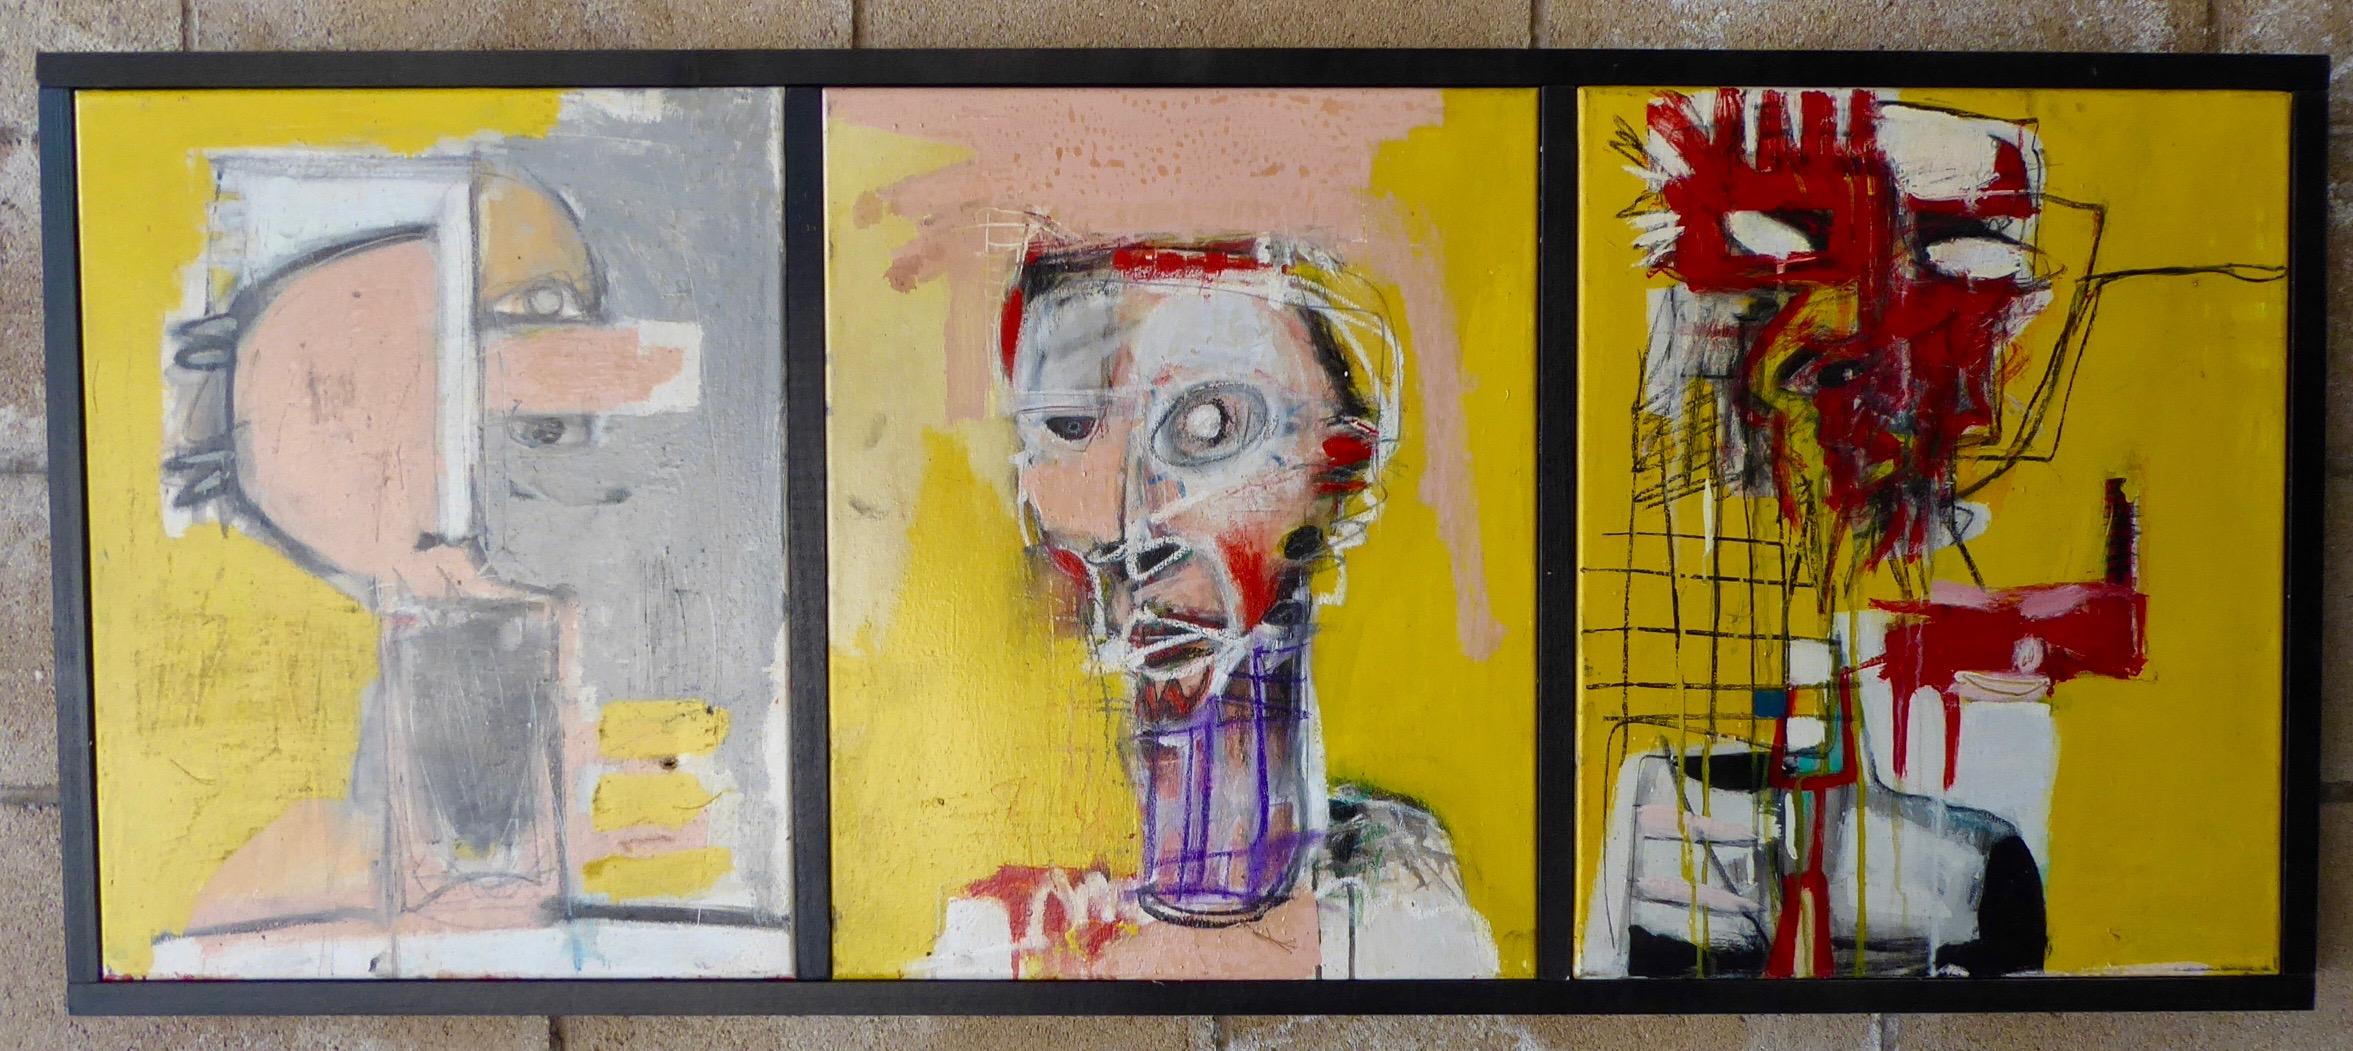 Heads 1, 2, 3. A provocative triptych of three heads floating on a yellow background by American painter Adam Henderson. Wittily presented as portraits, these are actually deep psychological dives into states of mind rather than physical features.